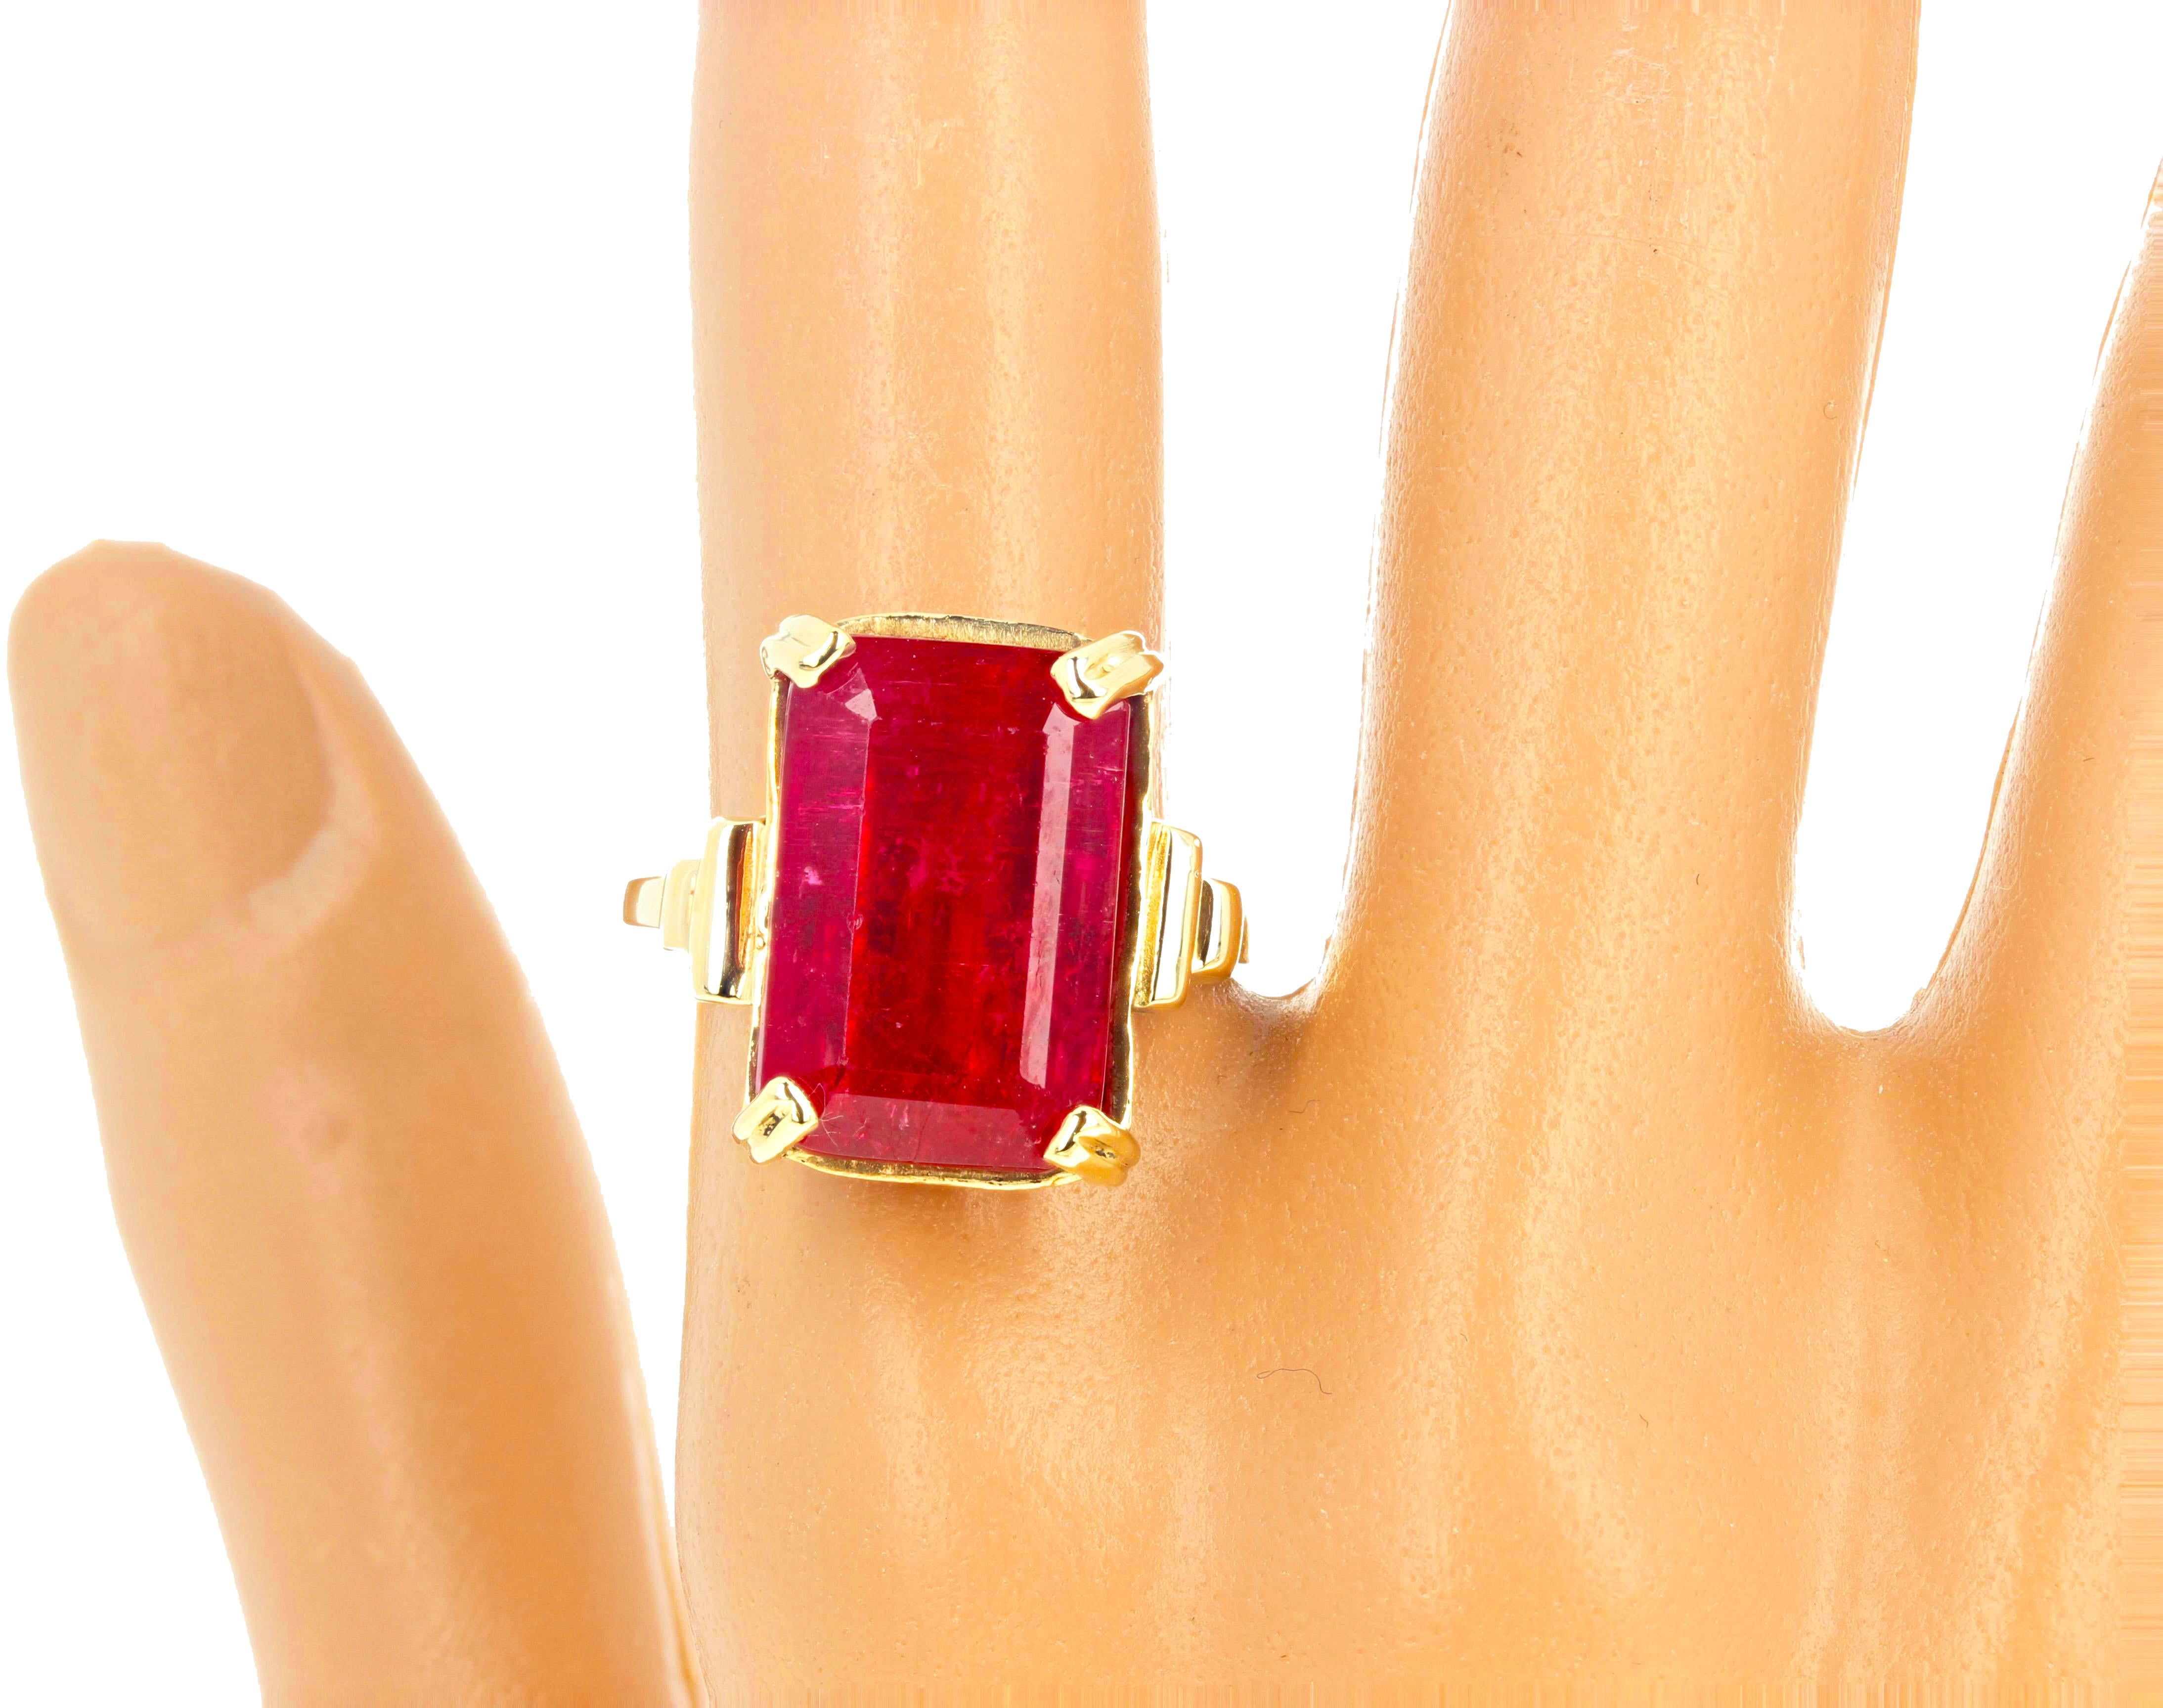 Gorgeous natural sparkling red Tourmaline set in this lovely antique 10Kt gold ring size 8 (sizable for free). Spectacular optical effect in the Tourmaline exhibits brilliant reflections and fire highlights in spectral colors of red and pinkyred and